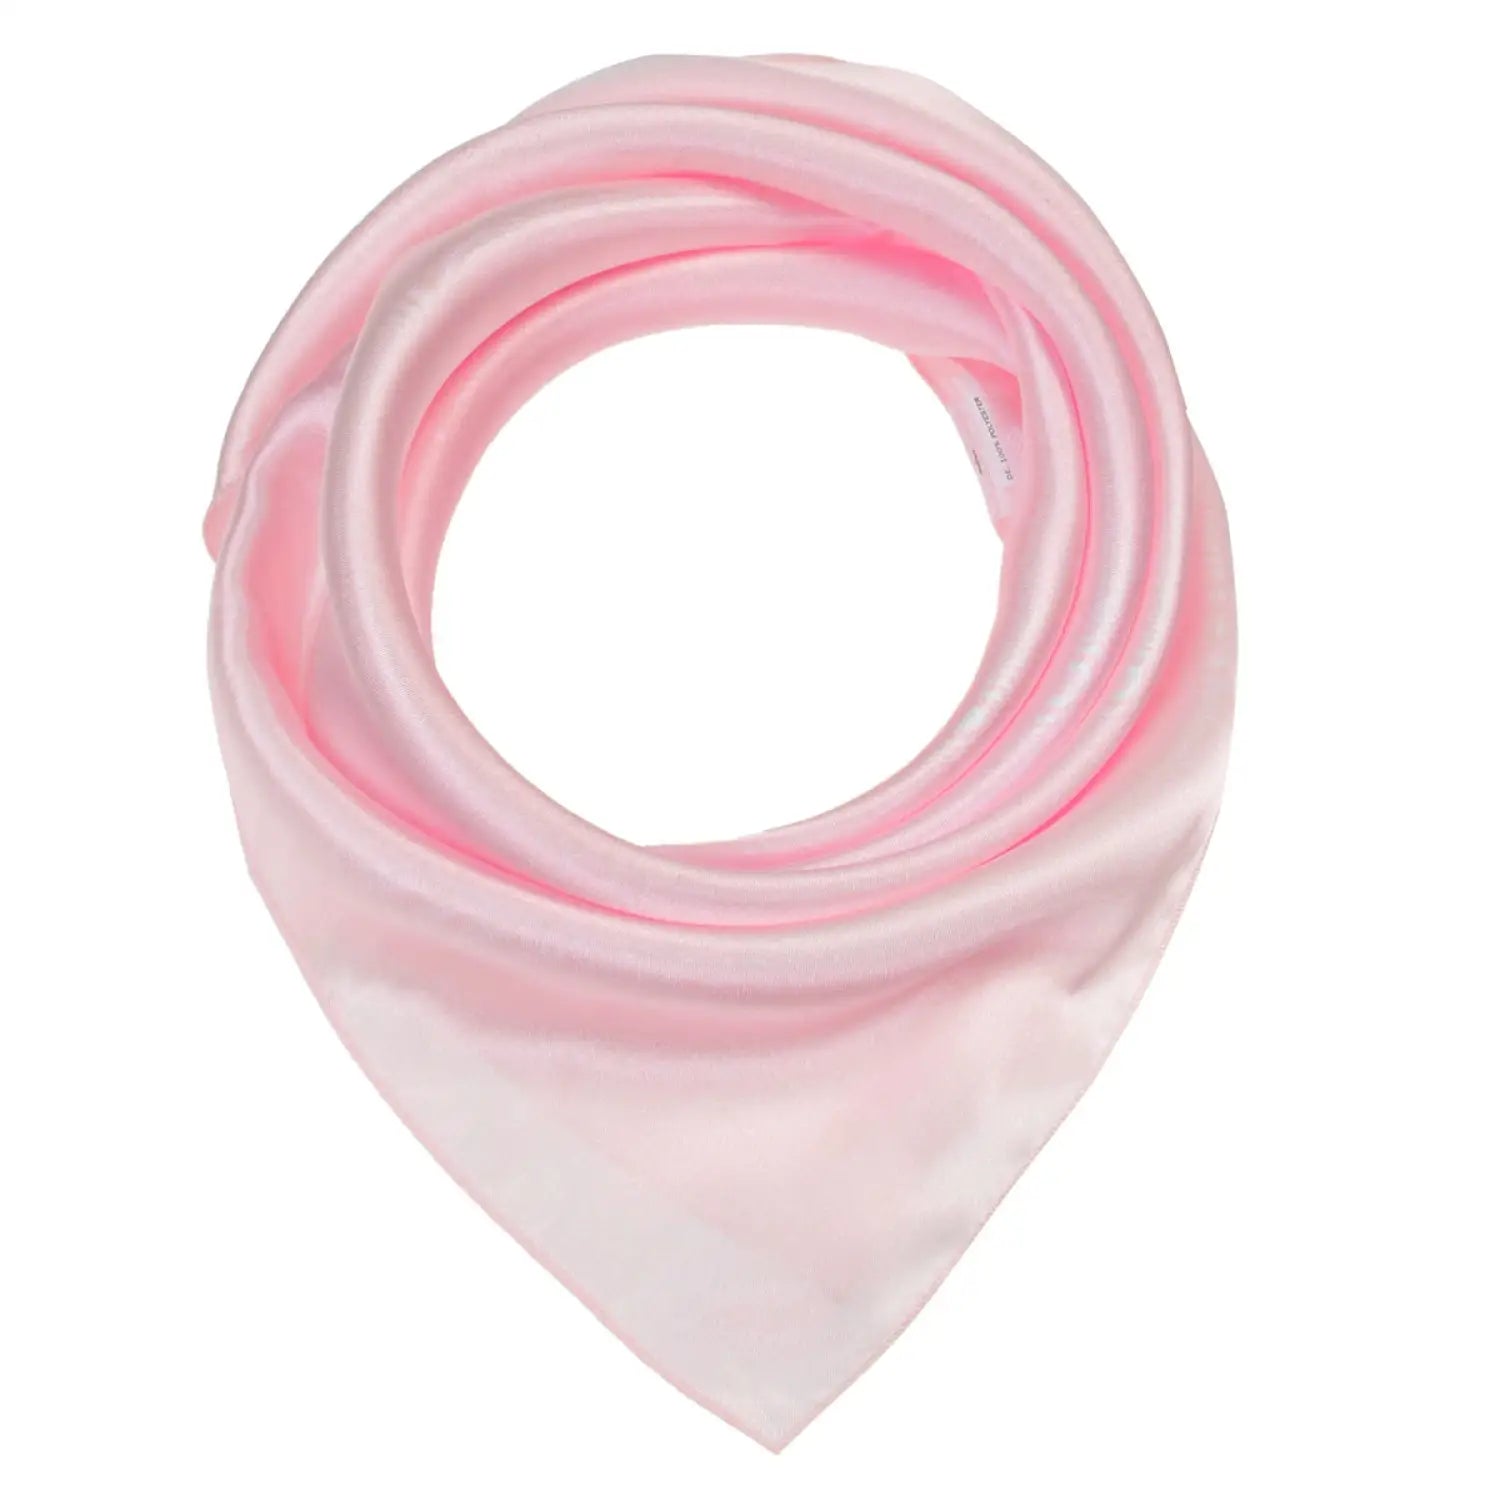 Smooth Satin Small Square Scarf in Pink on White Background